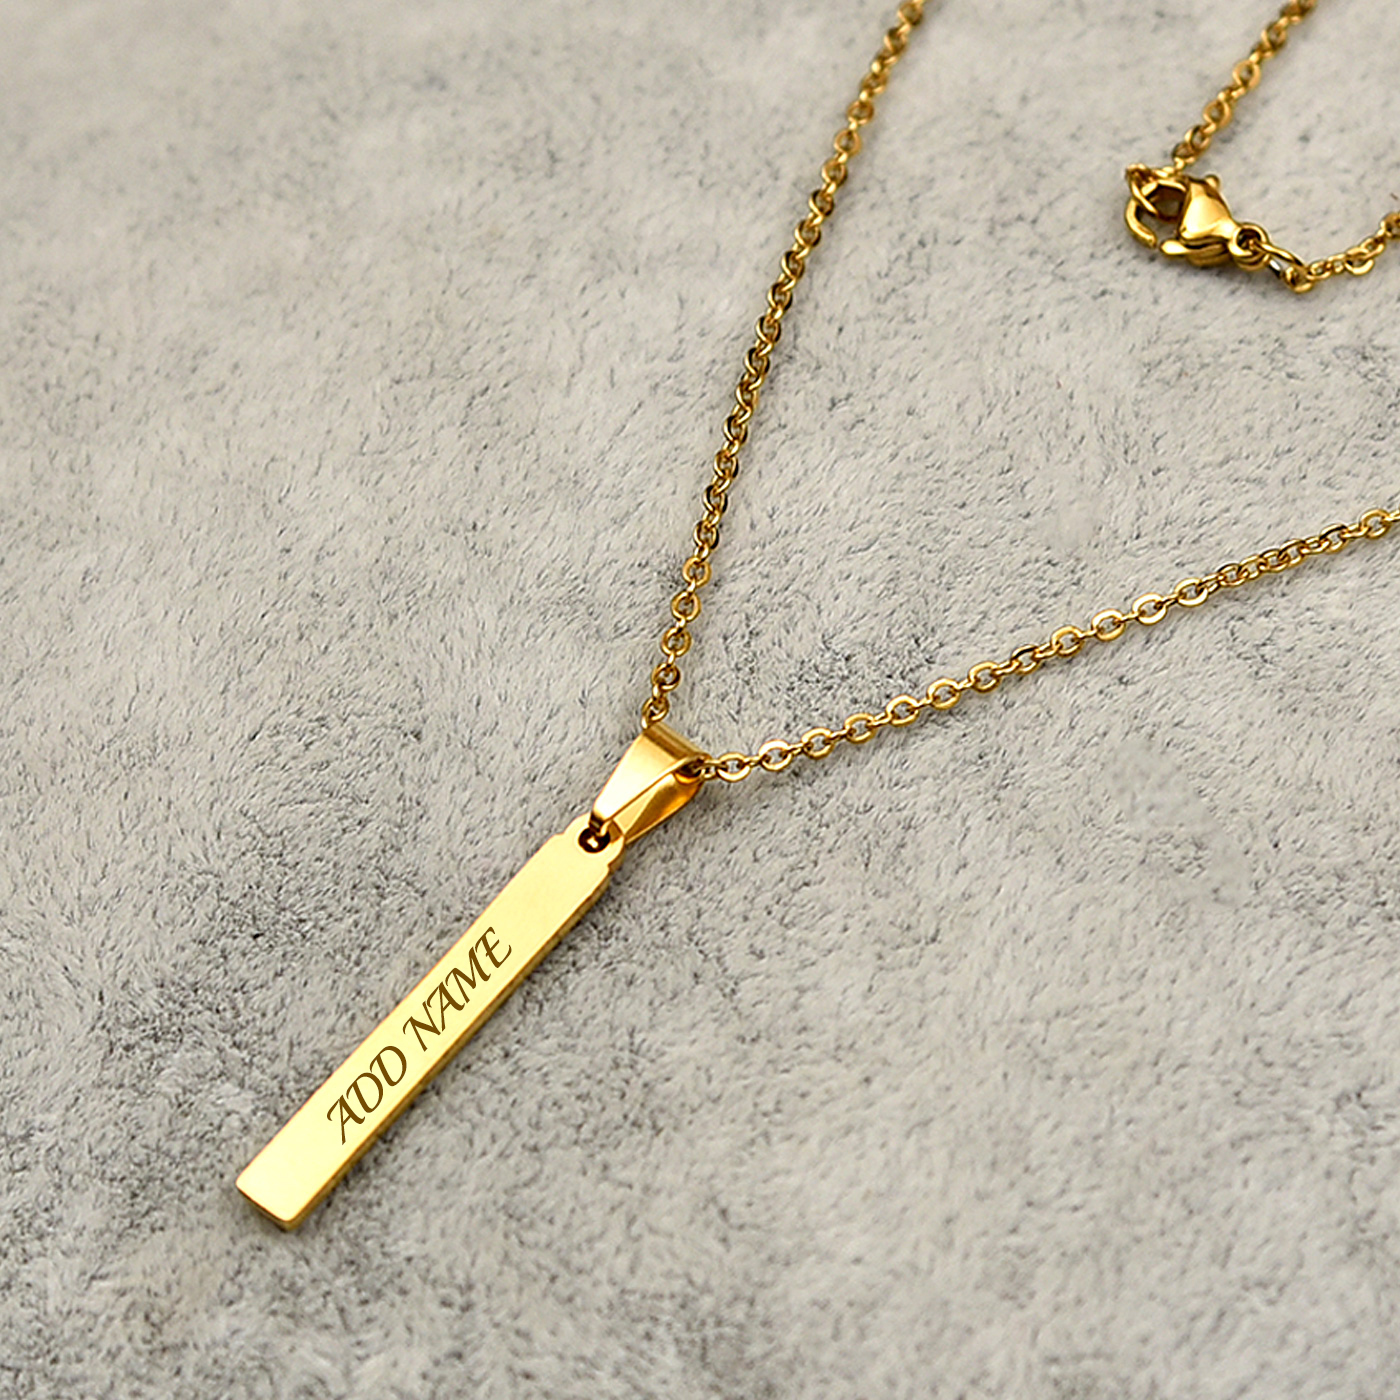 Personalized Bar Drop Pendant in a Gift Box